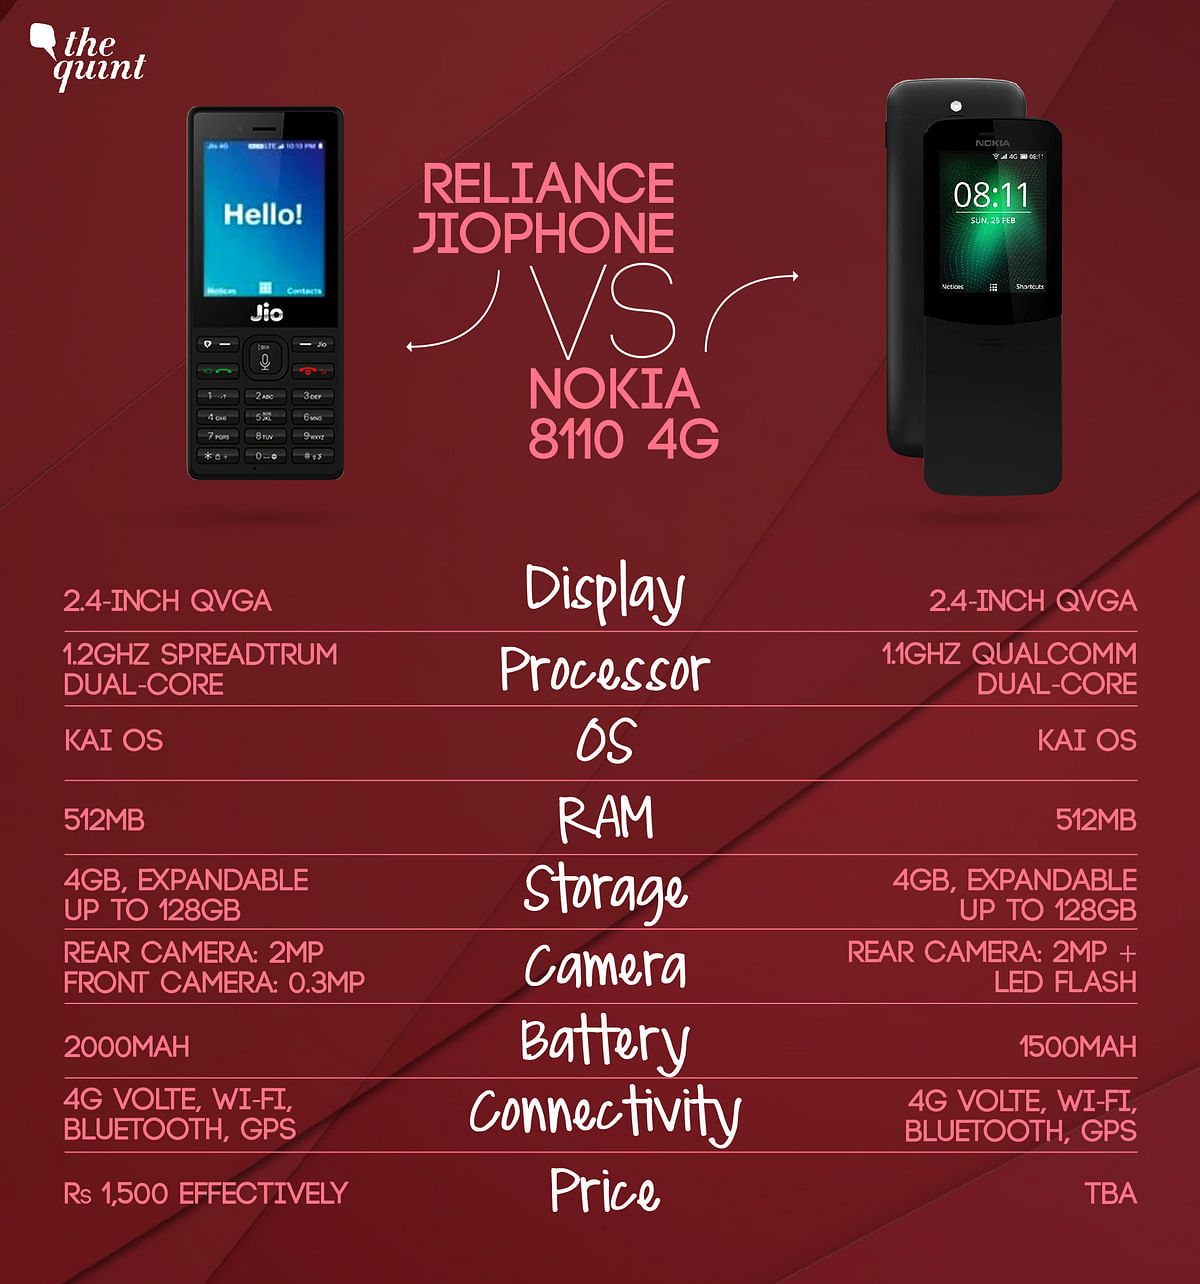 We compare the latest Nokia 8110 4G feature phone with the Reliance JioPhone. 